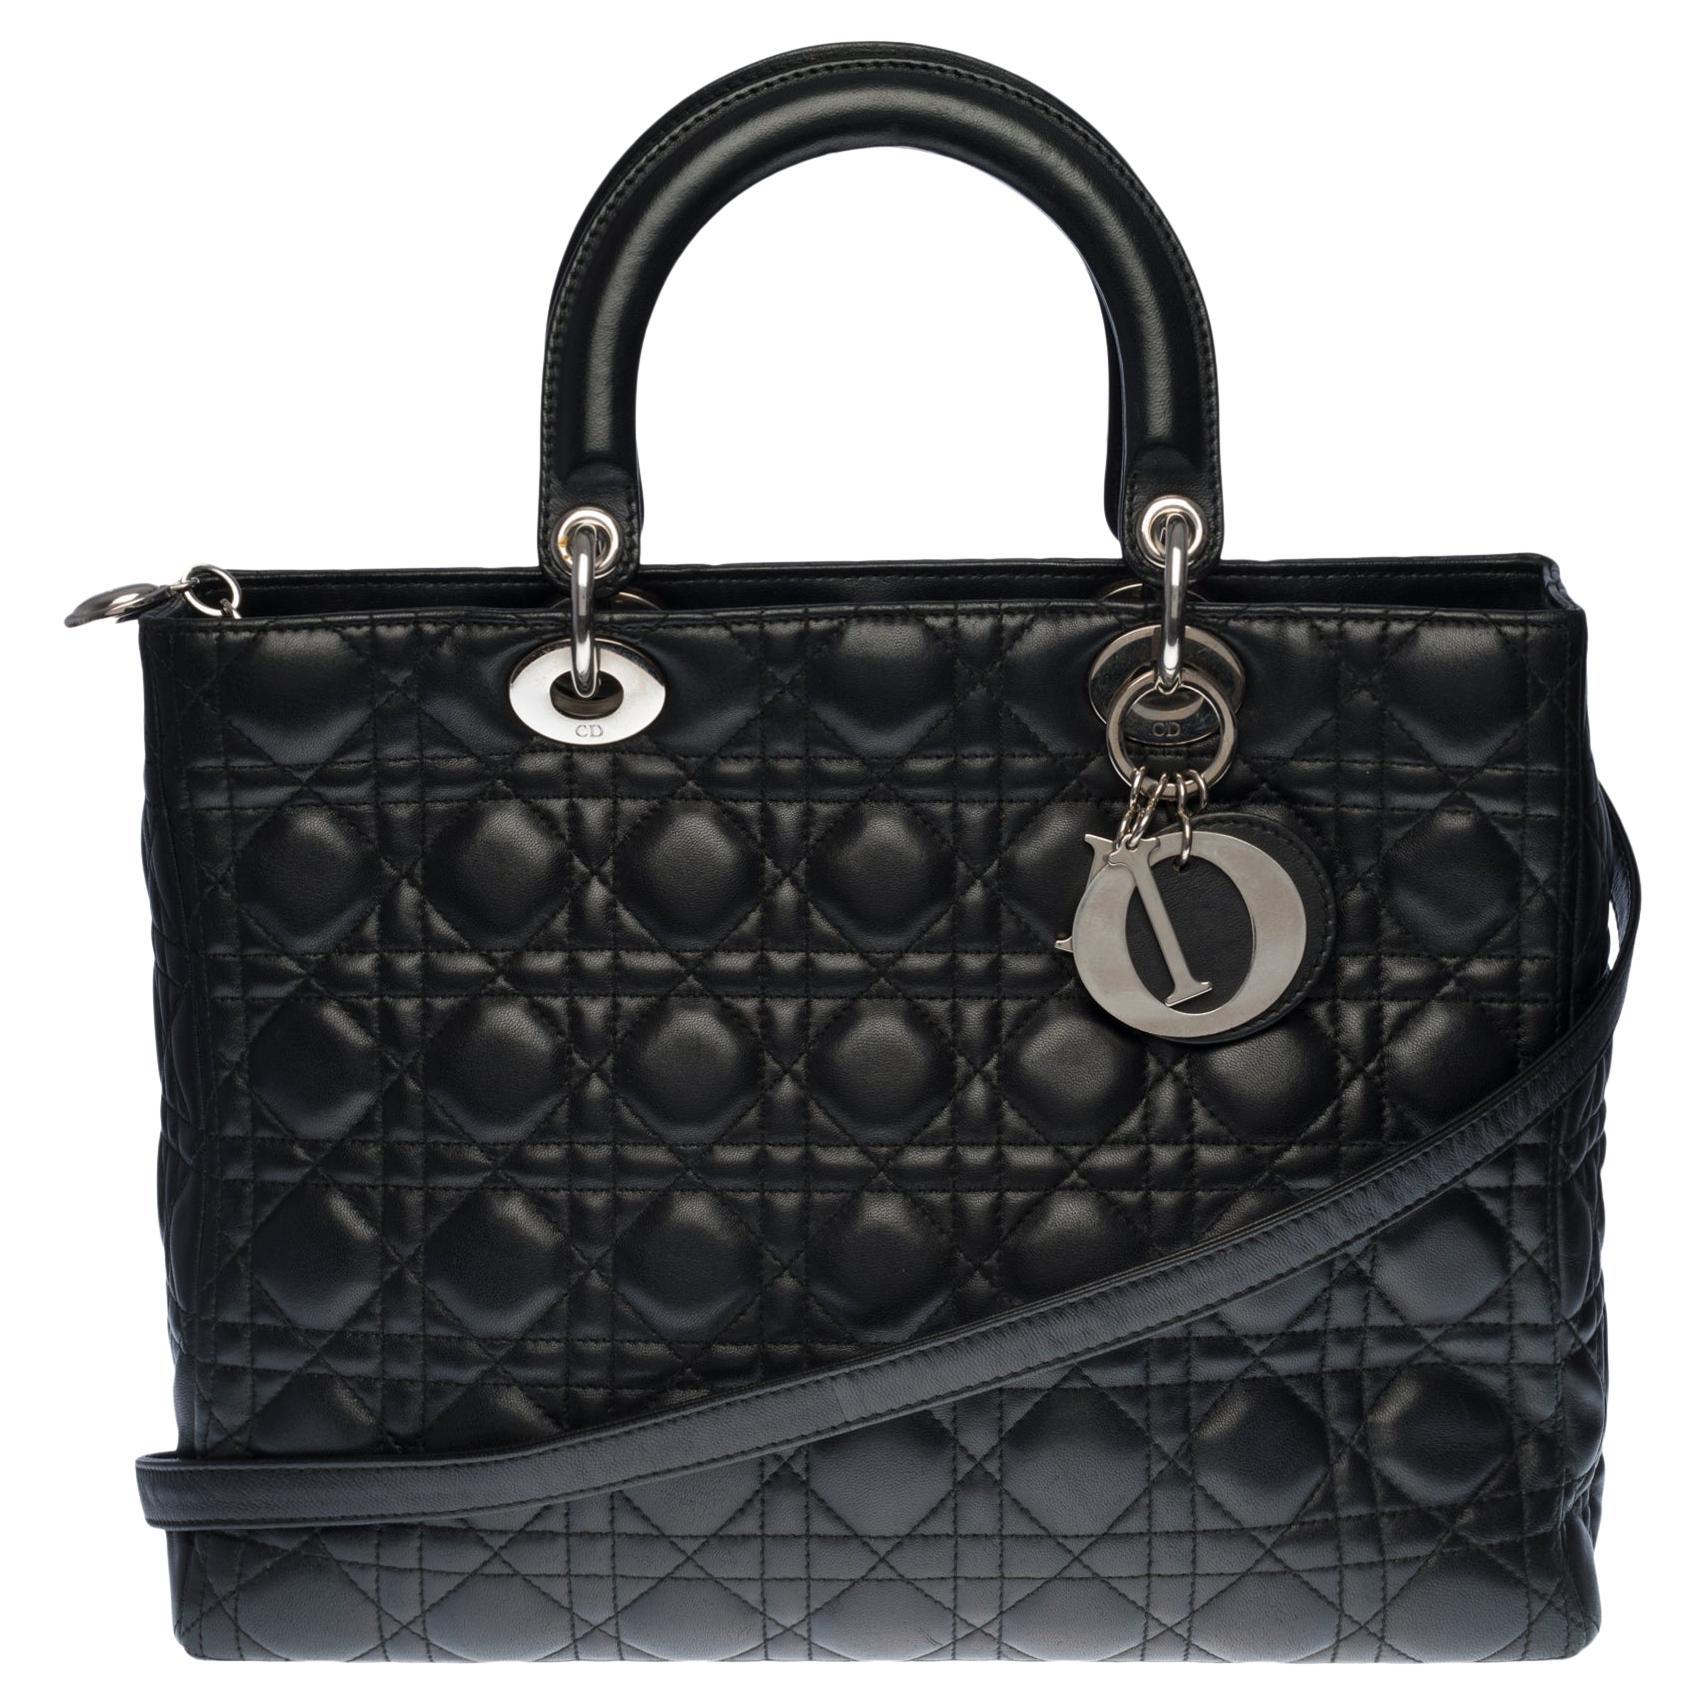  Lady Dior GM ( large size) shoulder bag with strap in black cannage leather,SHW